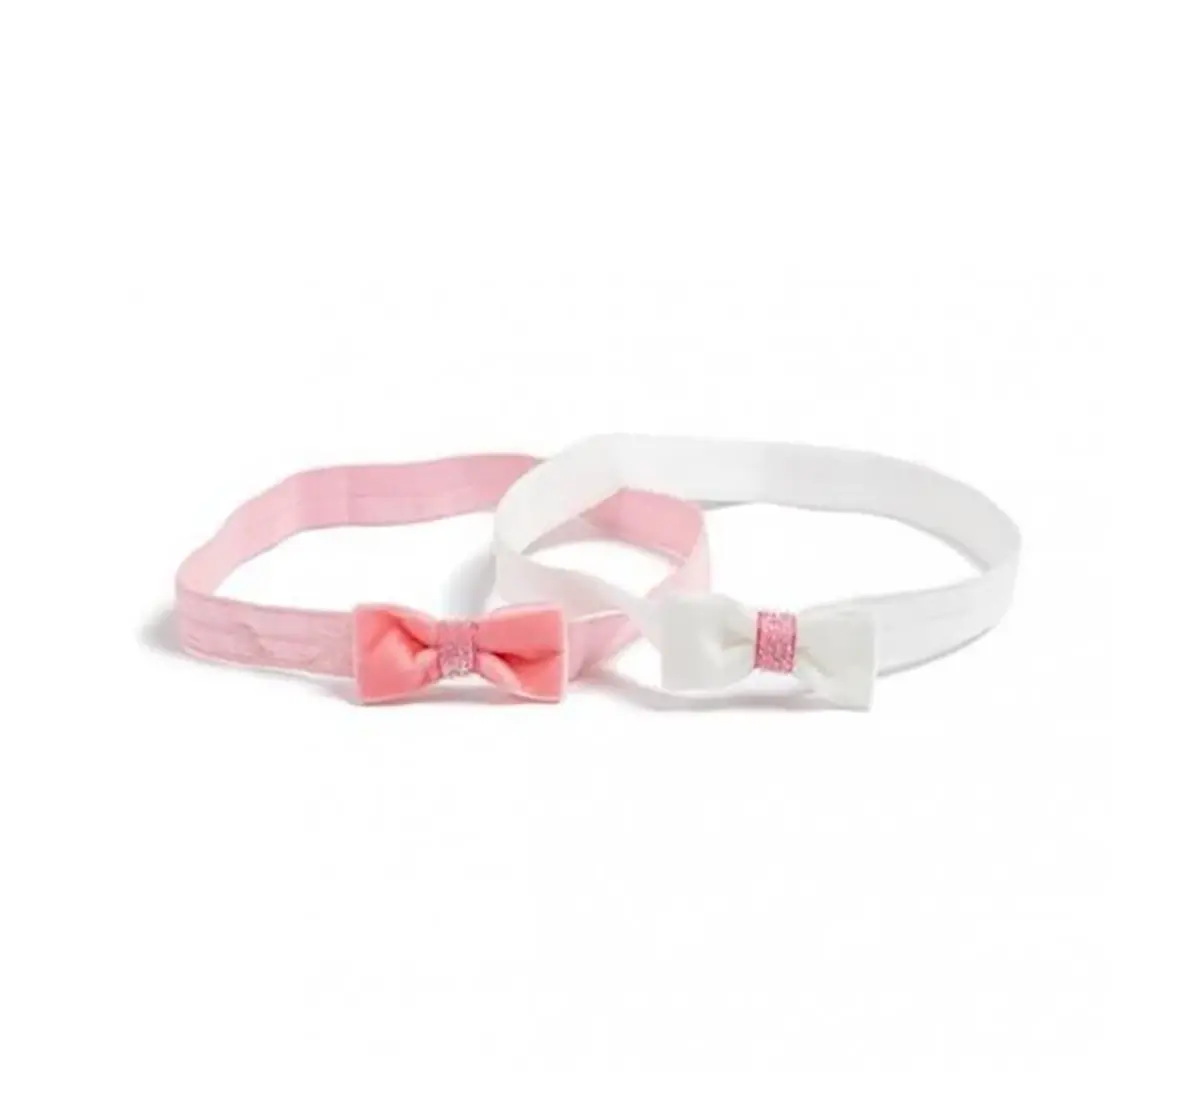 Luvley Pink And White Bow Headbands (2 Pack) Toileteries and Makeup for age 3Y+ 